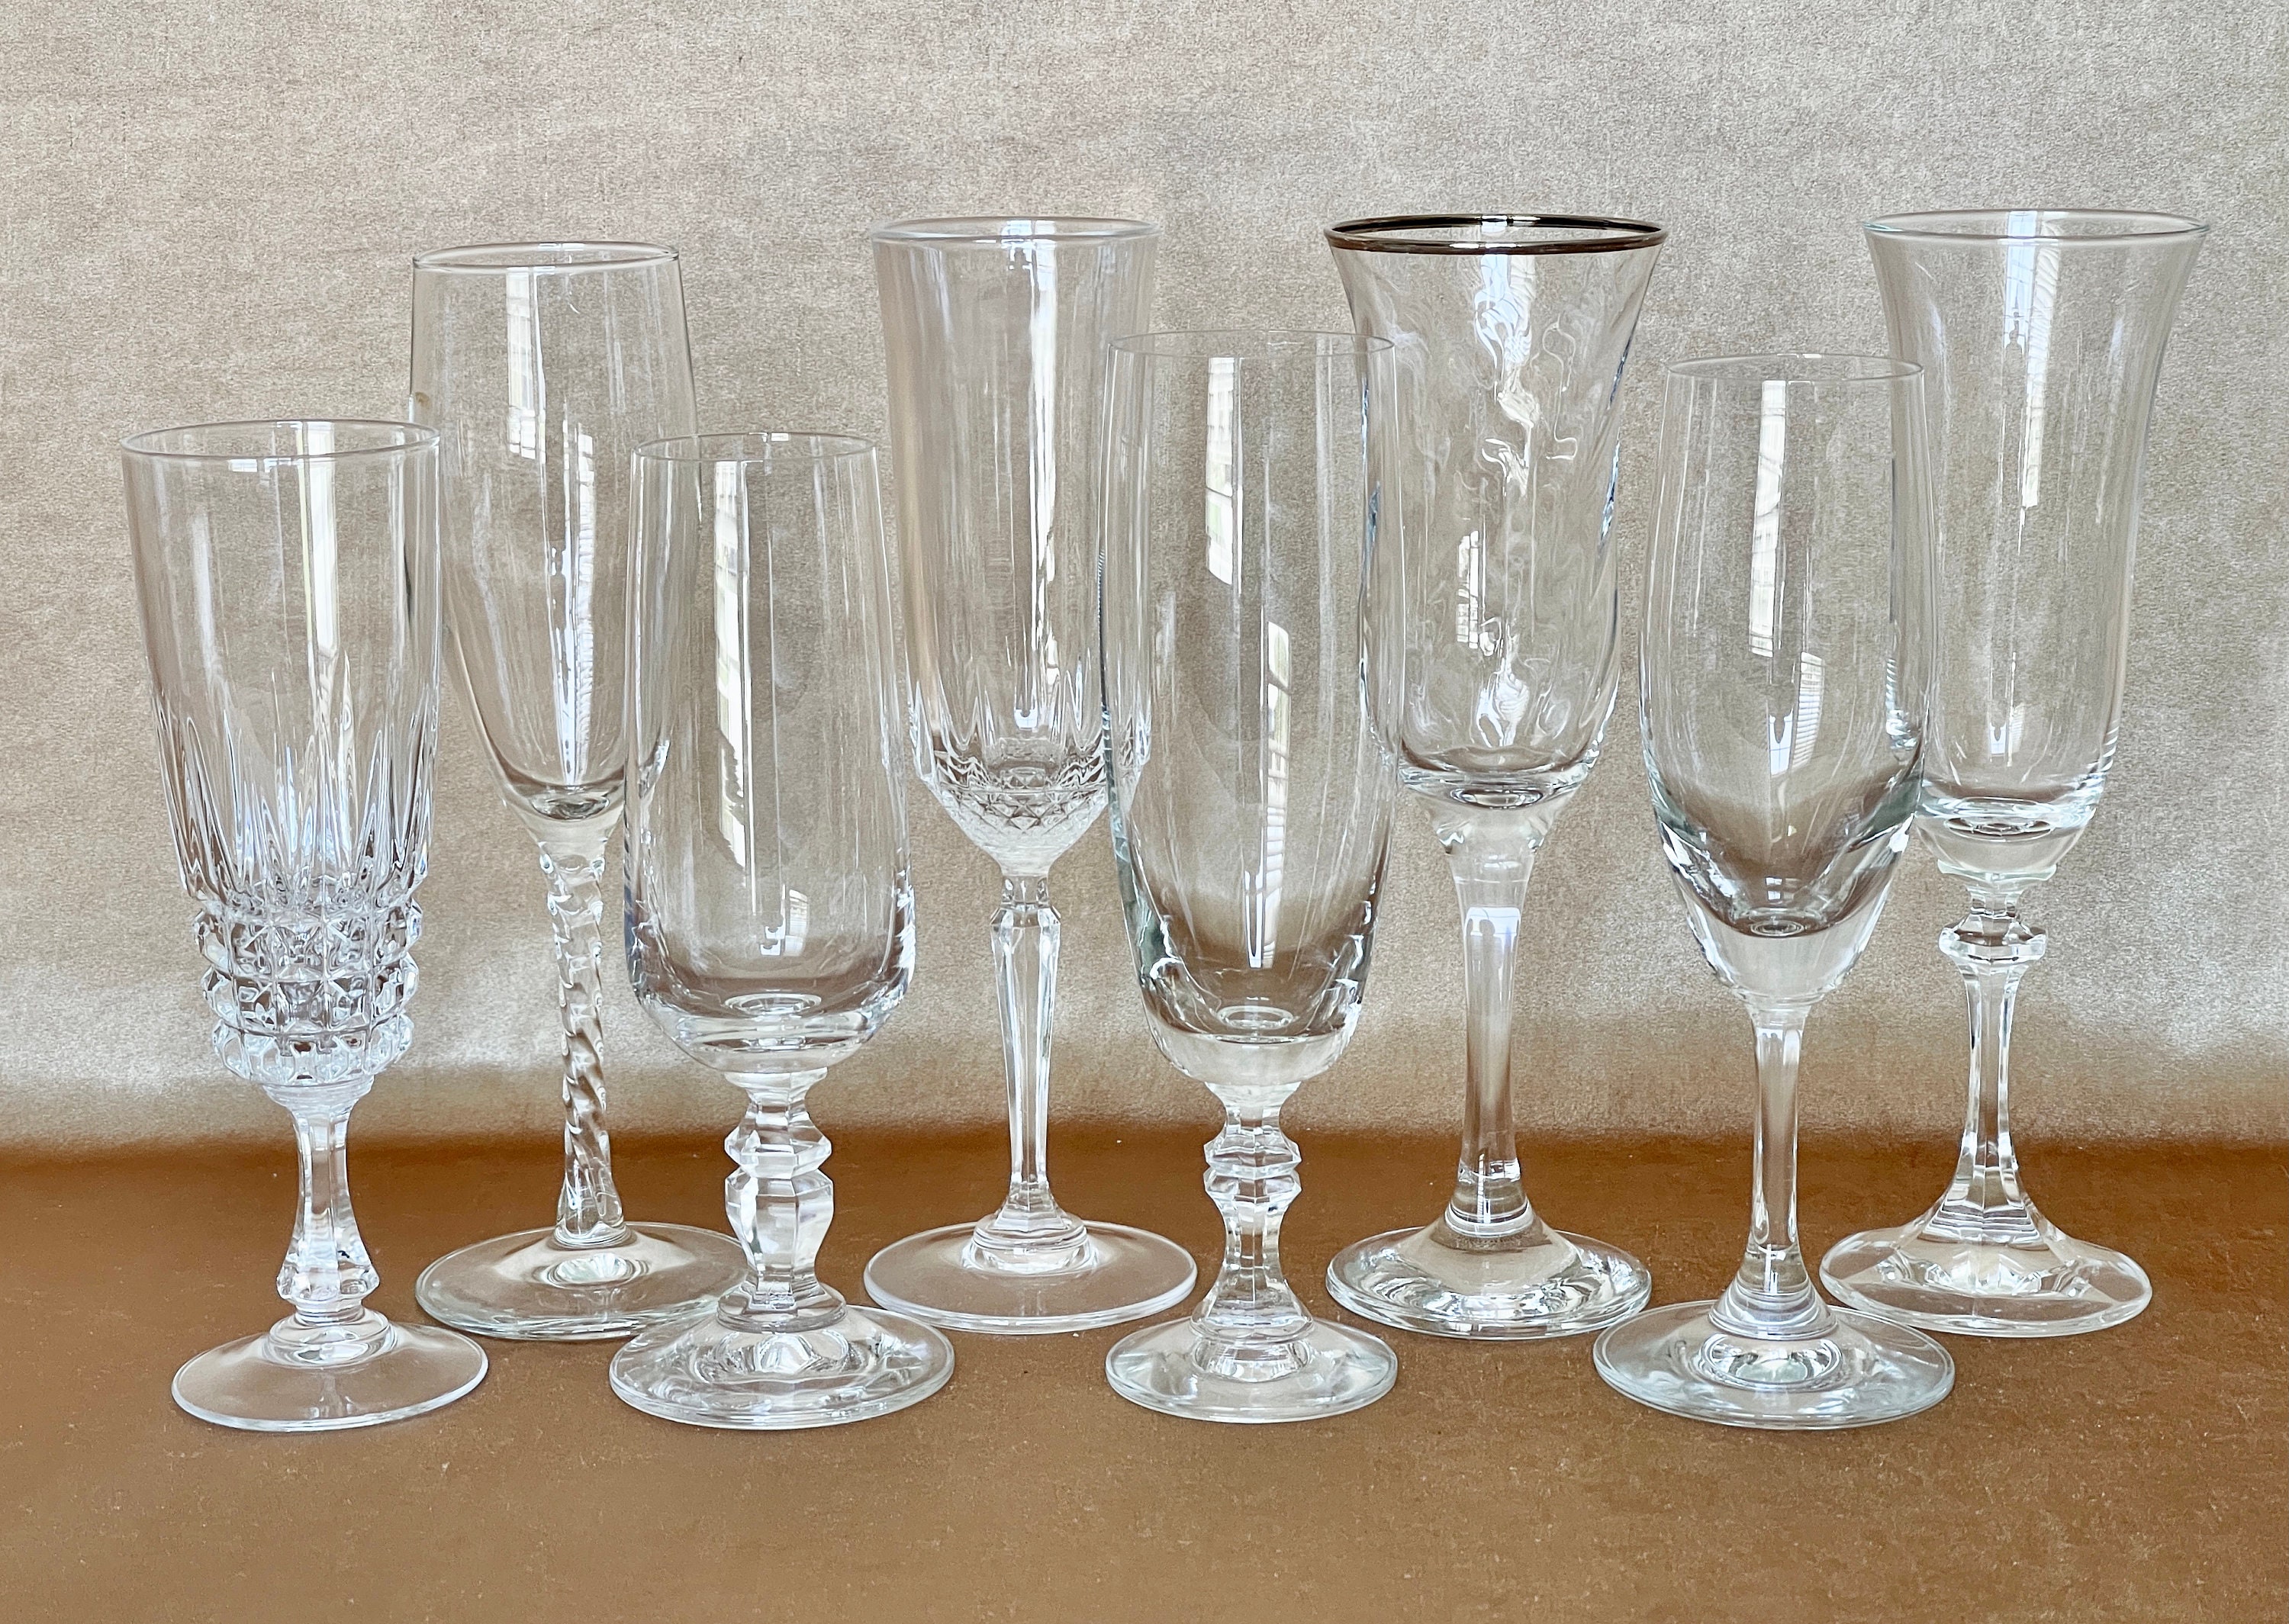 Vintage Mixed Champagne Flutes, Set of 8 Champagne Glasses 